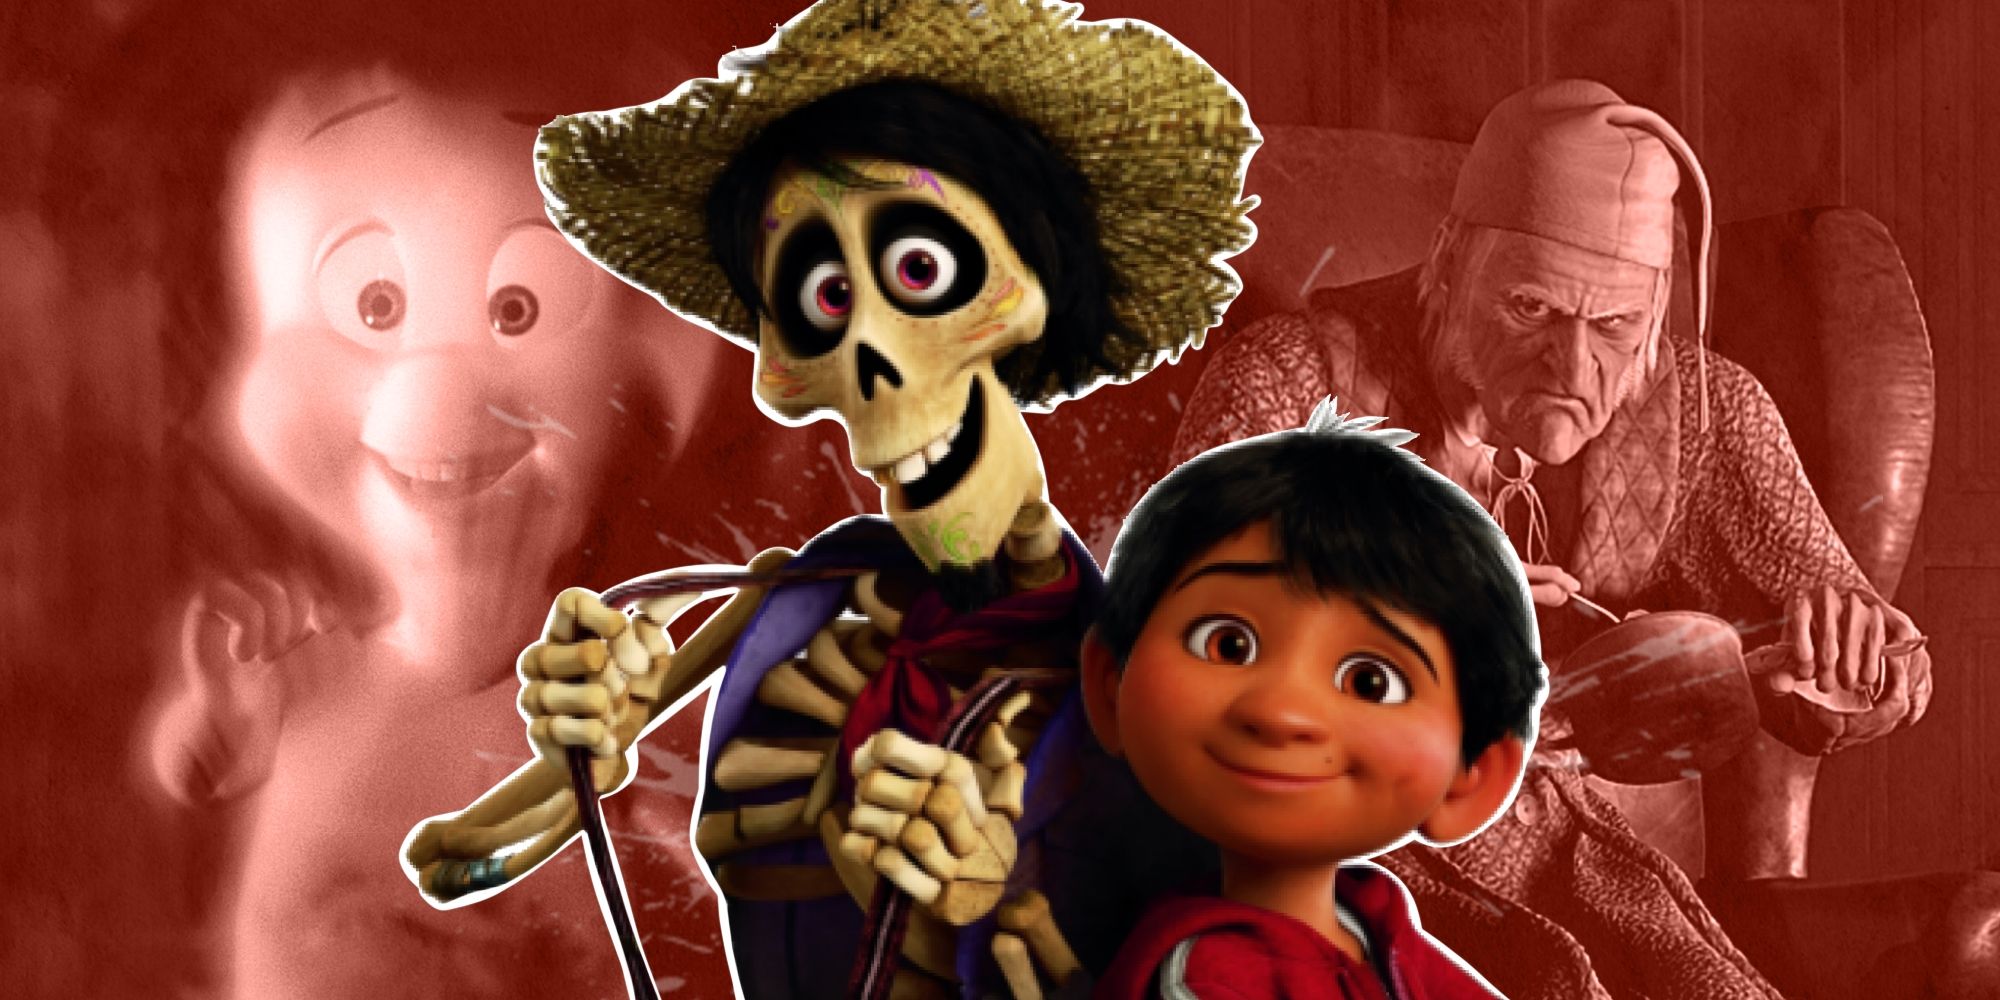 Miguel and Hector from 'Coco' pictured with Casper the Friendly Ghost and Ebenezer Scrooge from 'A Christmas Carol'